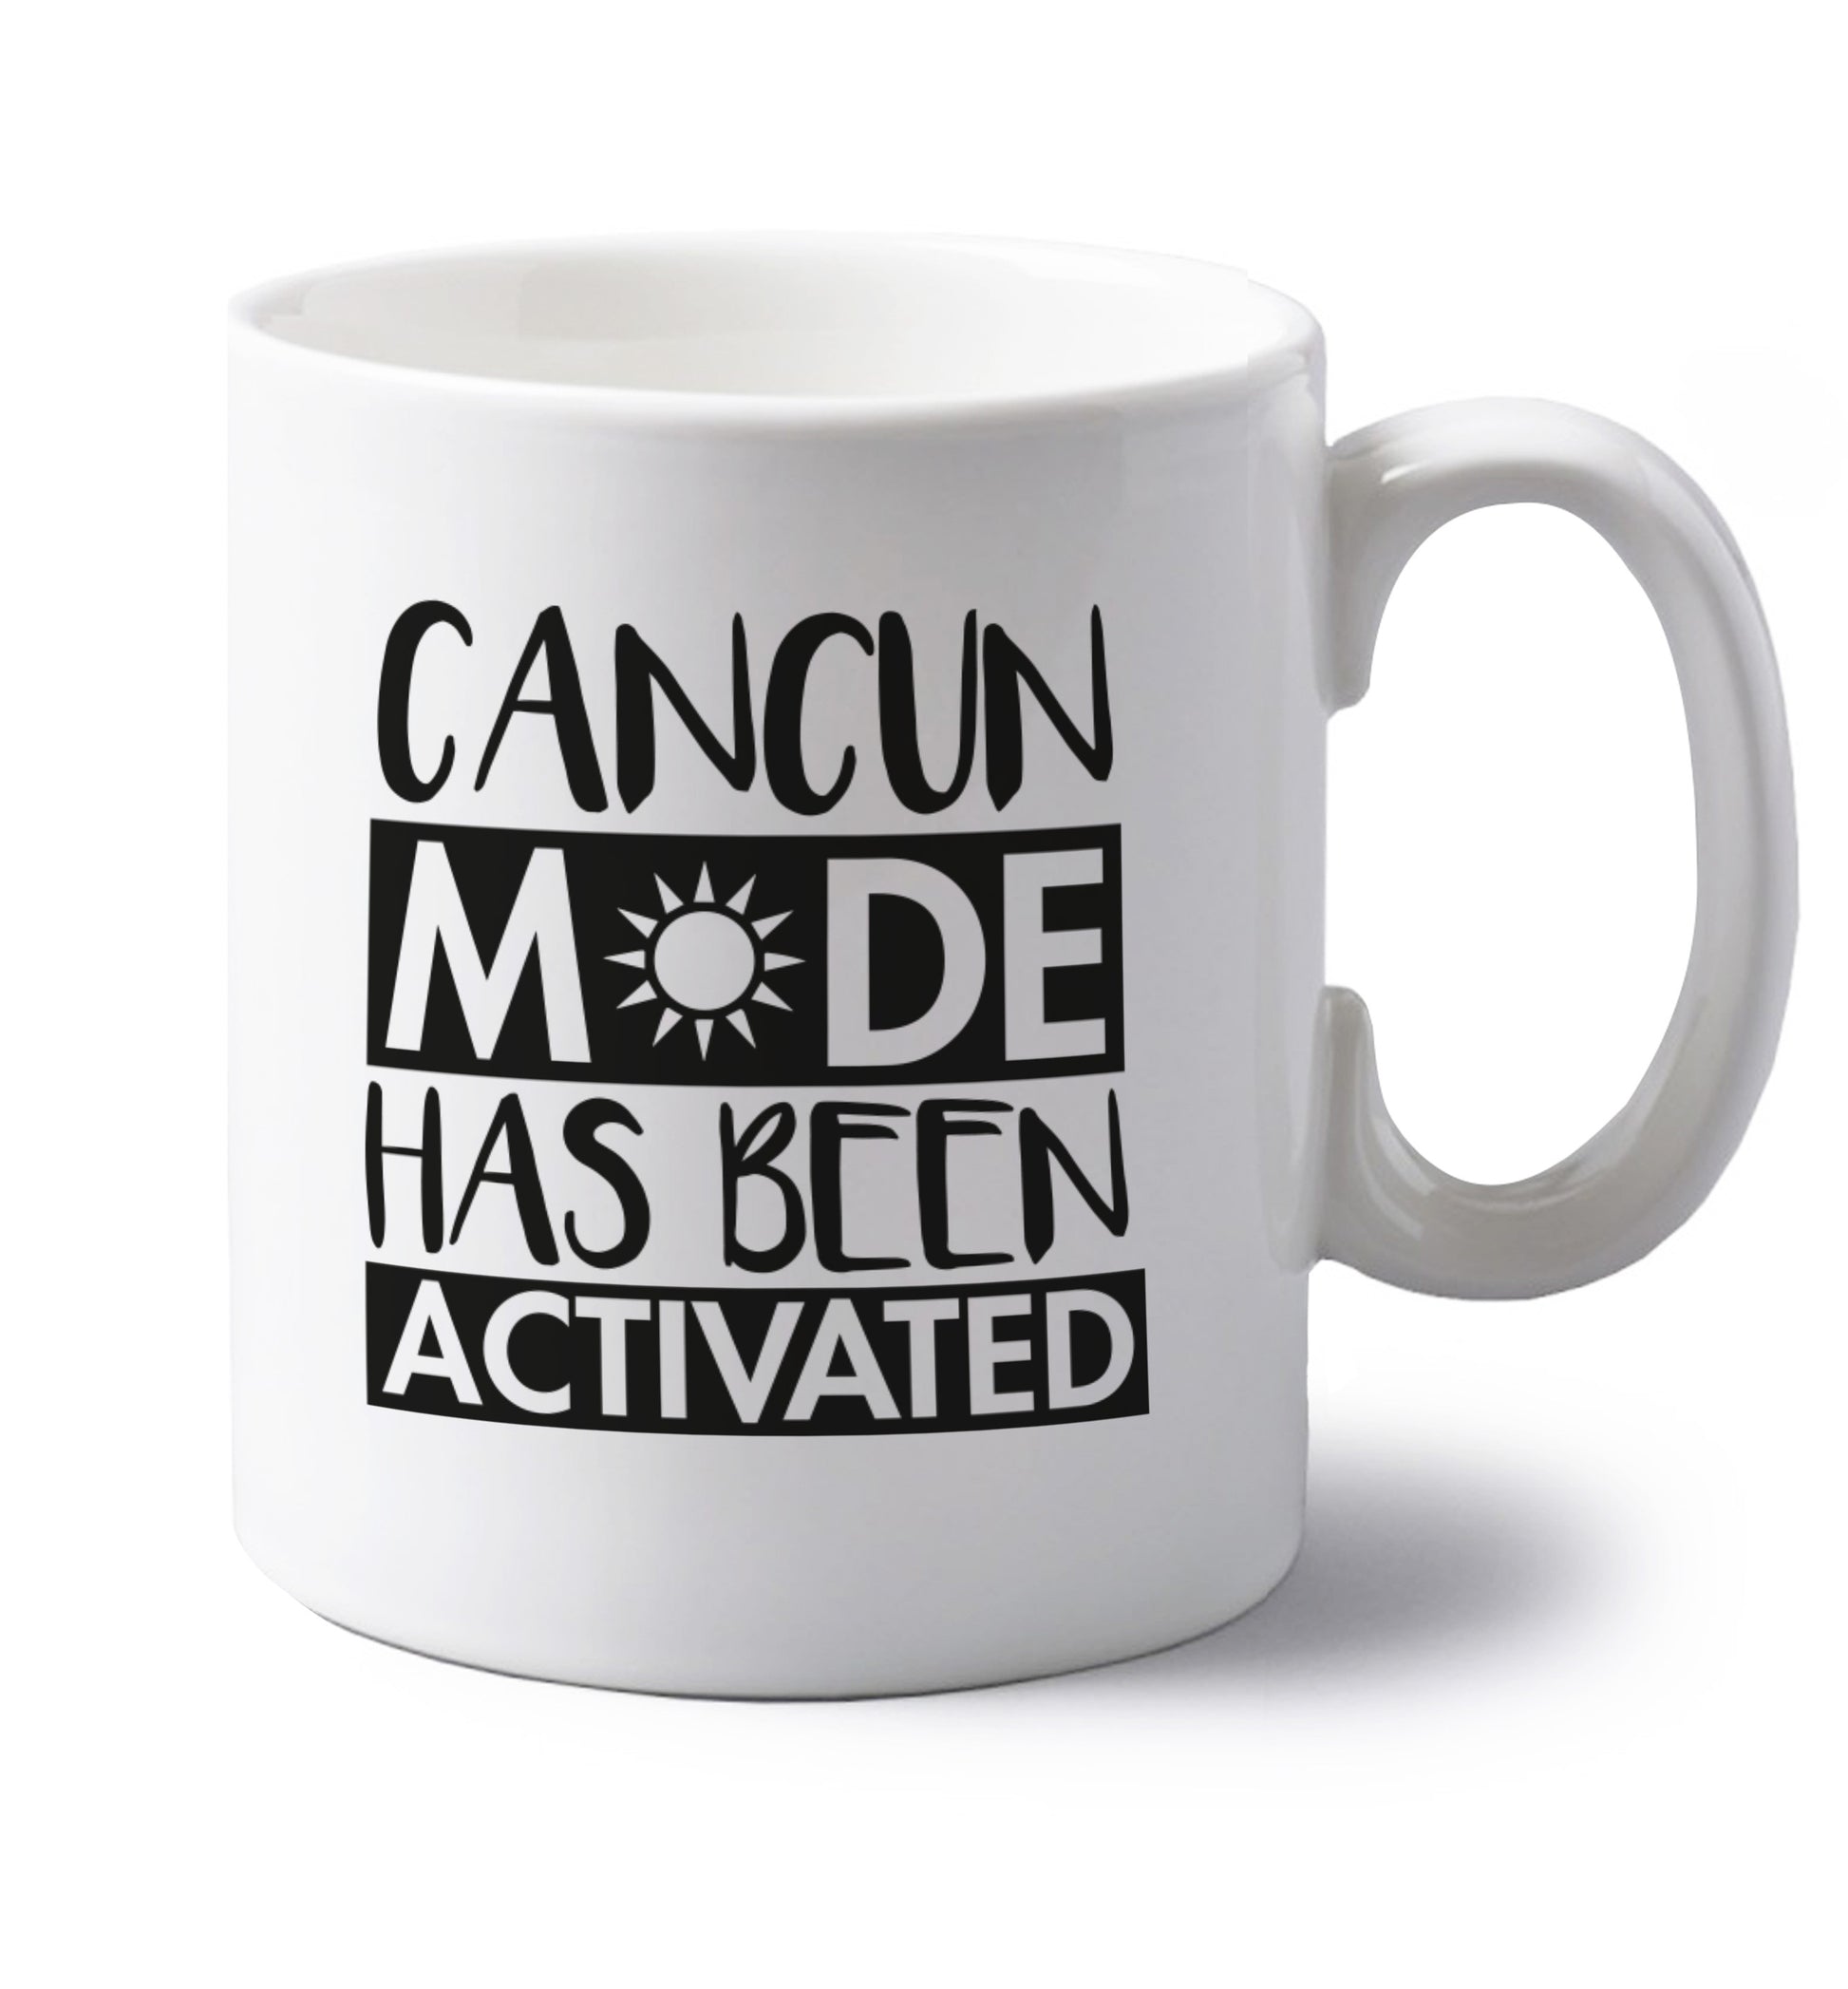 Cancun mode has been activated left handed white ceramic mug 